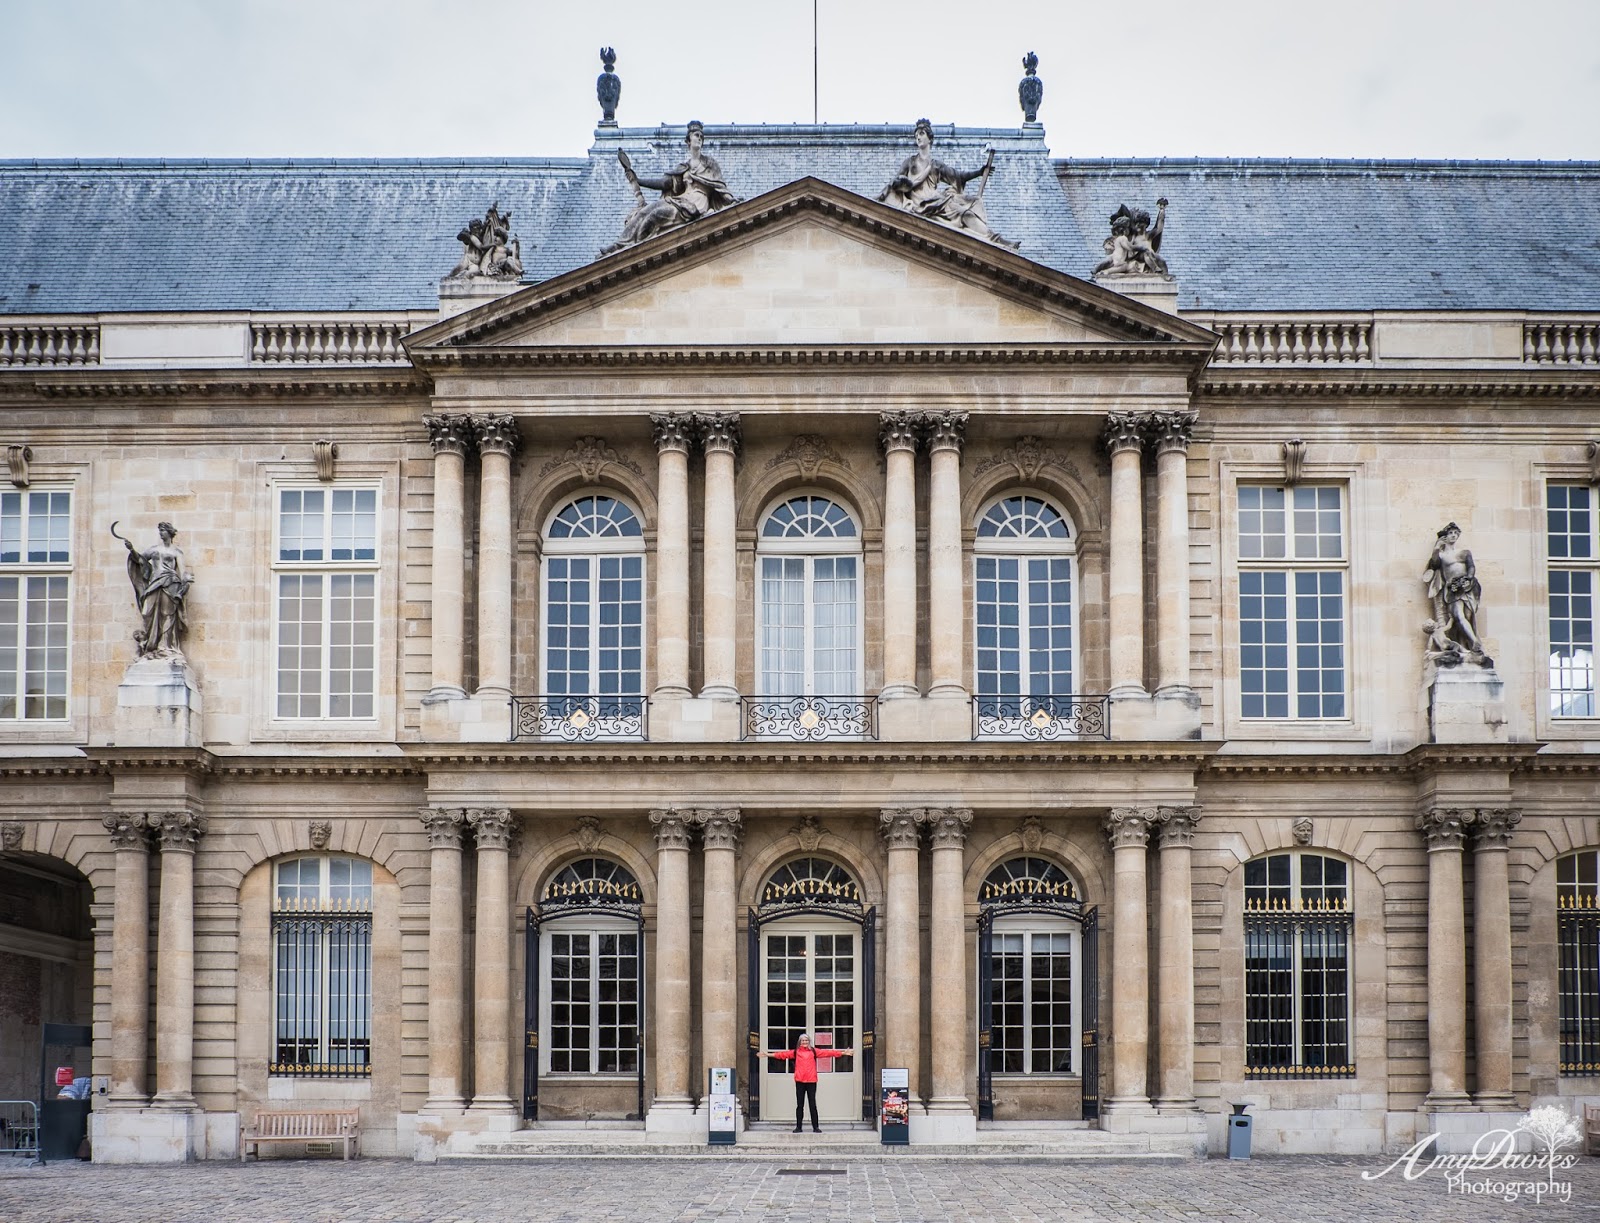 Capture My World : Paris! Beautiful Archives Nationales and L'Eglise ...